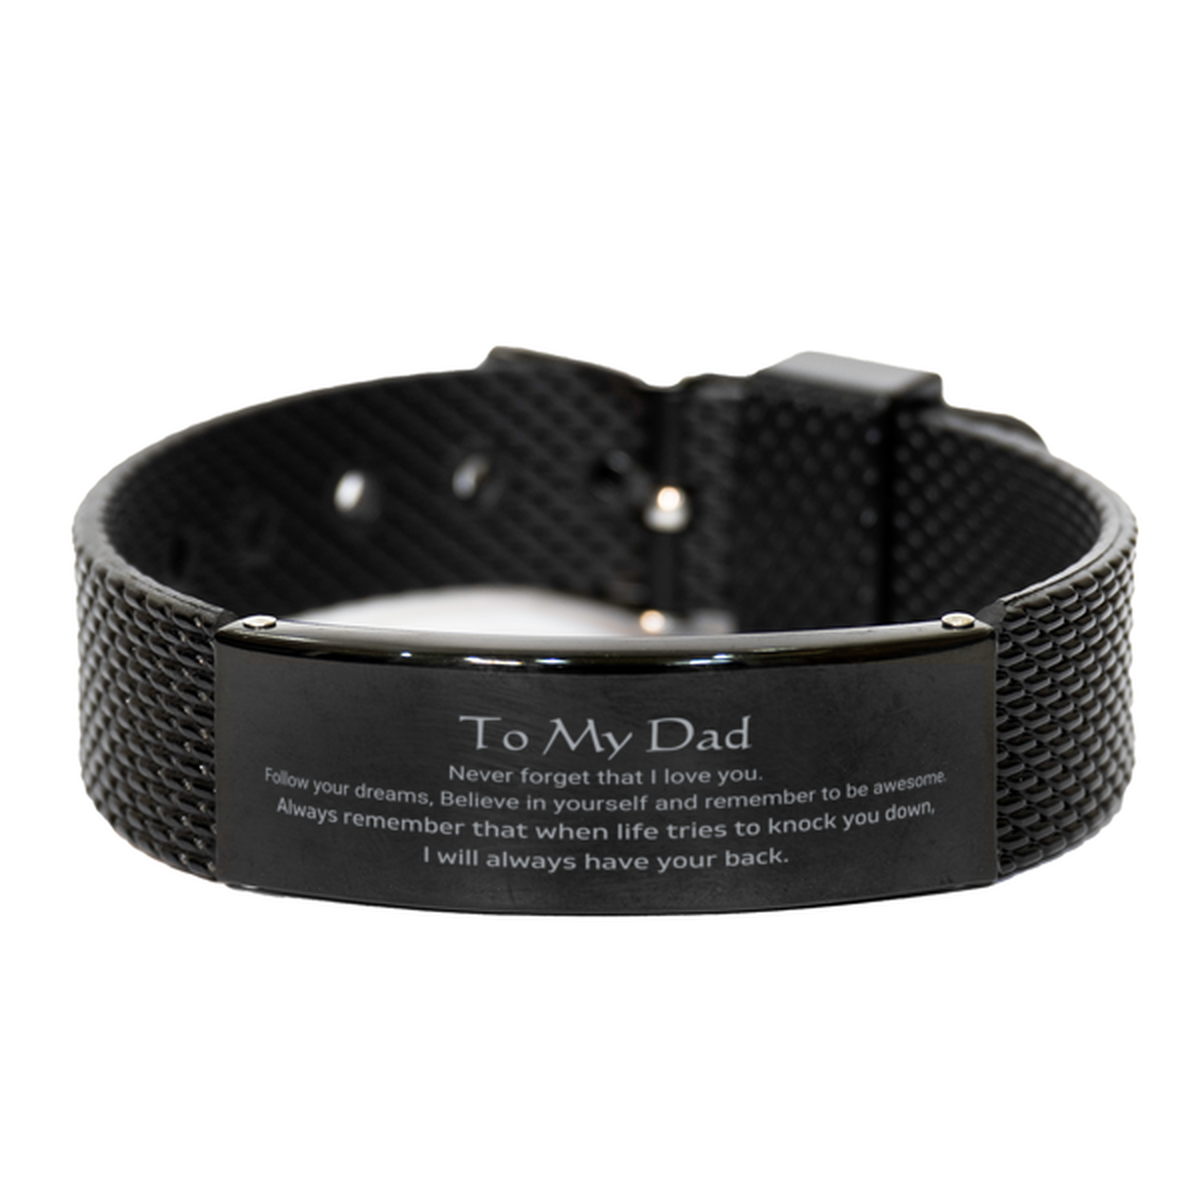 Inspirational Gifts for Dad, Follow your dreams, Believe in yourself, Dad Black Shark Mesh Bracelet, Birthday Christmas Unique Gifts For Dad